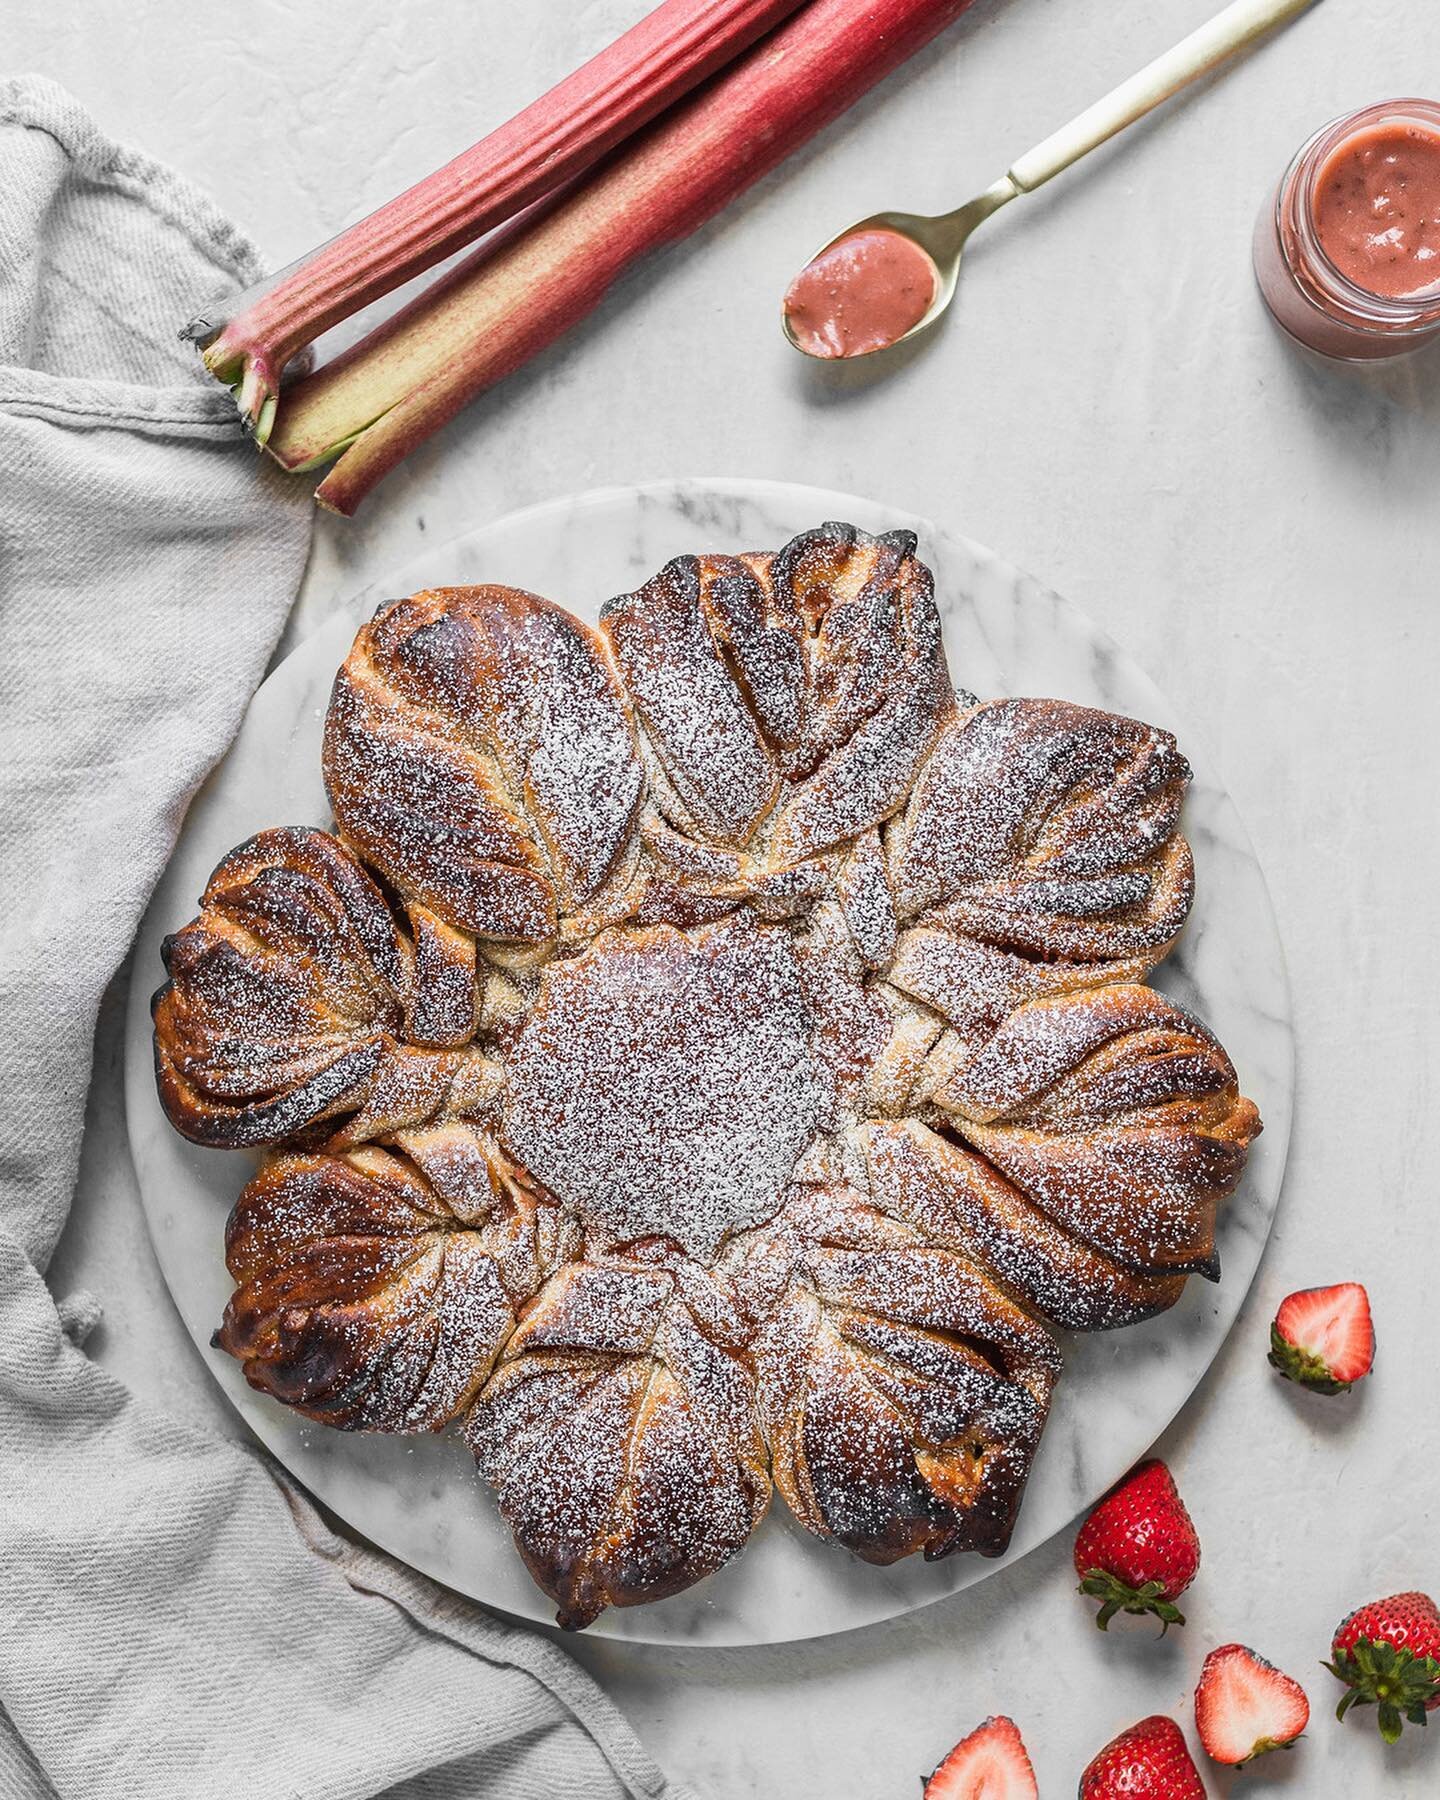 We all know strawberry rhubarb pie, but have you tried the combo in another form? I've partnered with @kana.goods to bring you this delicious Strawberry Rhubarb Star Bread! |ad
⠀⠀⠀⠀⠀⠀⠀⠀⠀
Who says star bread has to be saved for winter holidays? This s